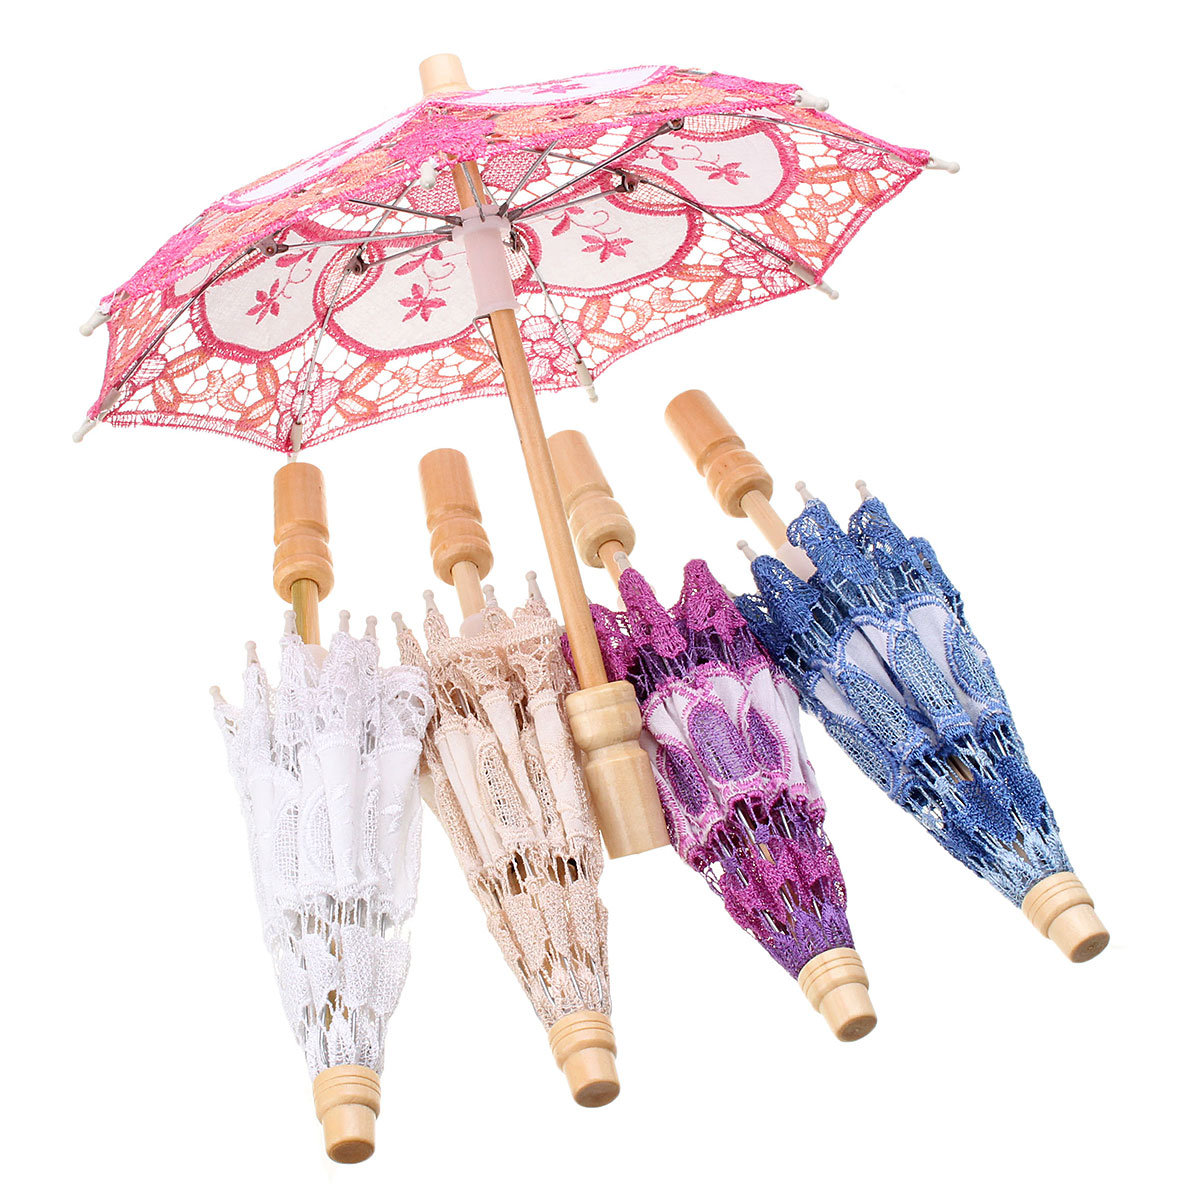 

Lace Elegant Embroidered Parasol Umbrella For Bridal Wedding Party Prop Decoration, Rose red purple blue white white